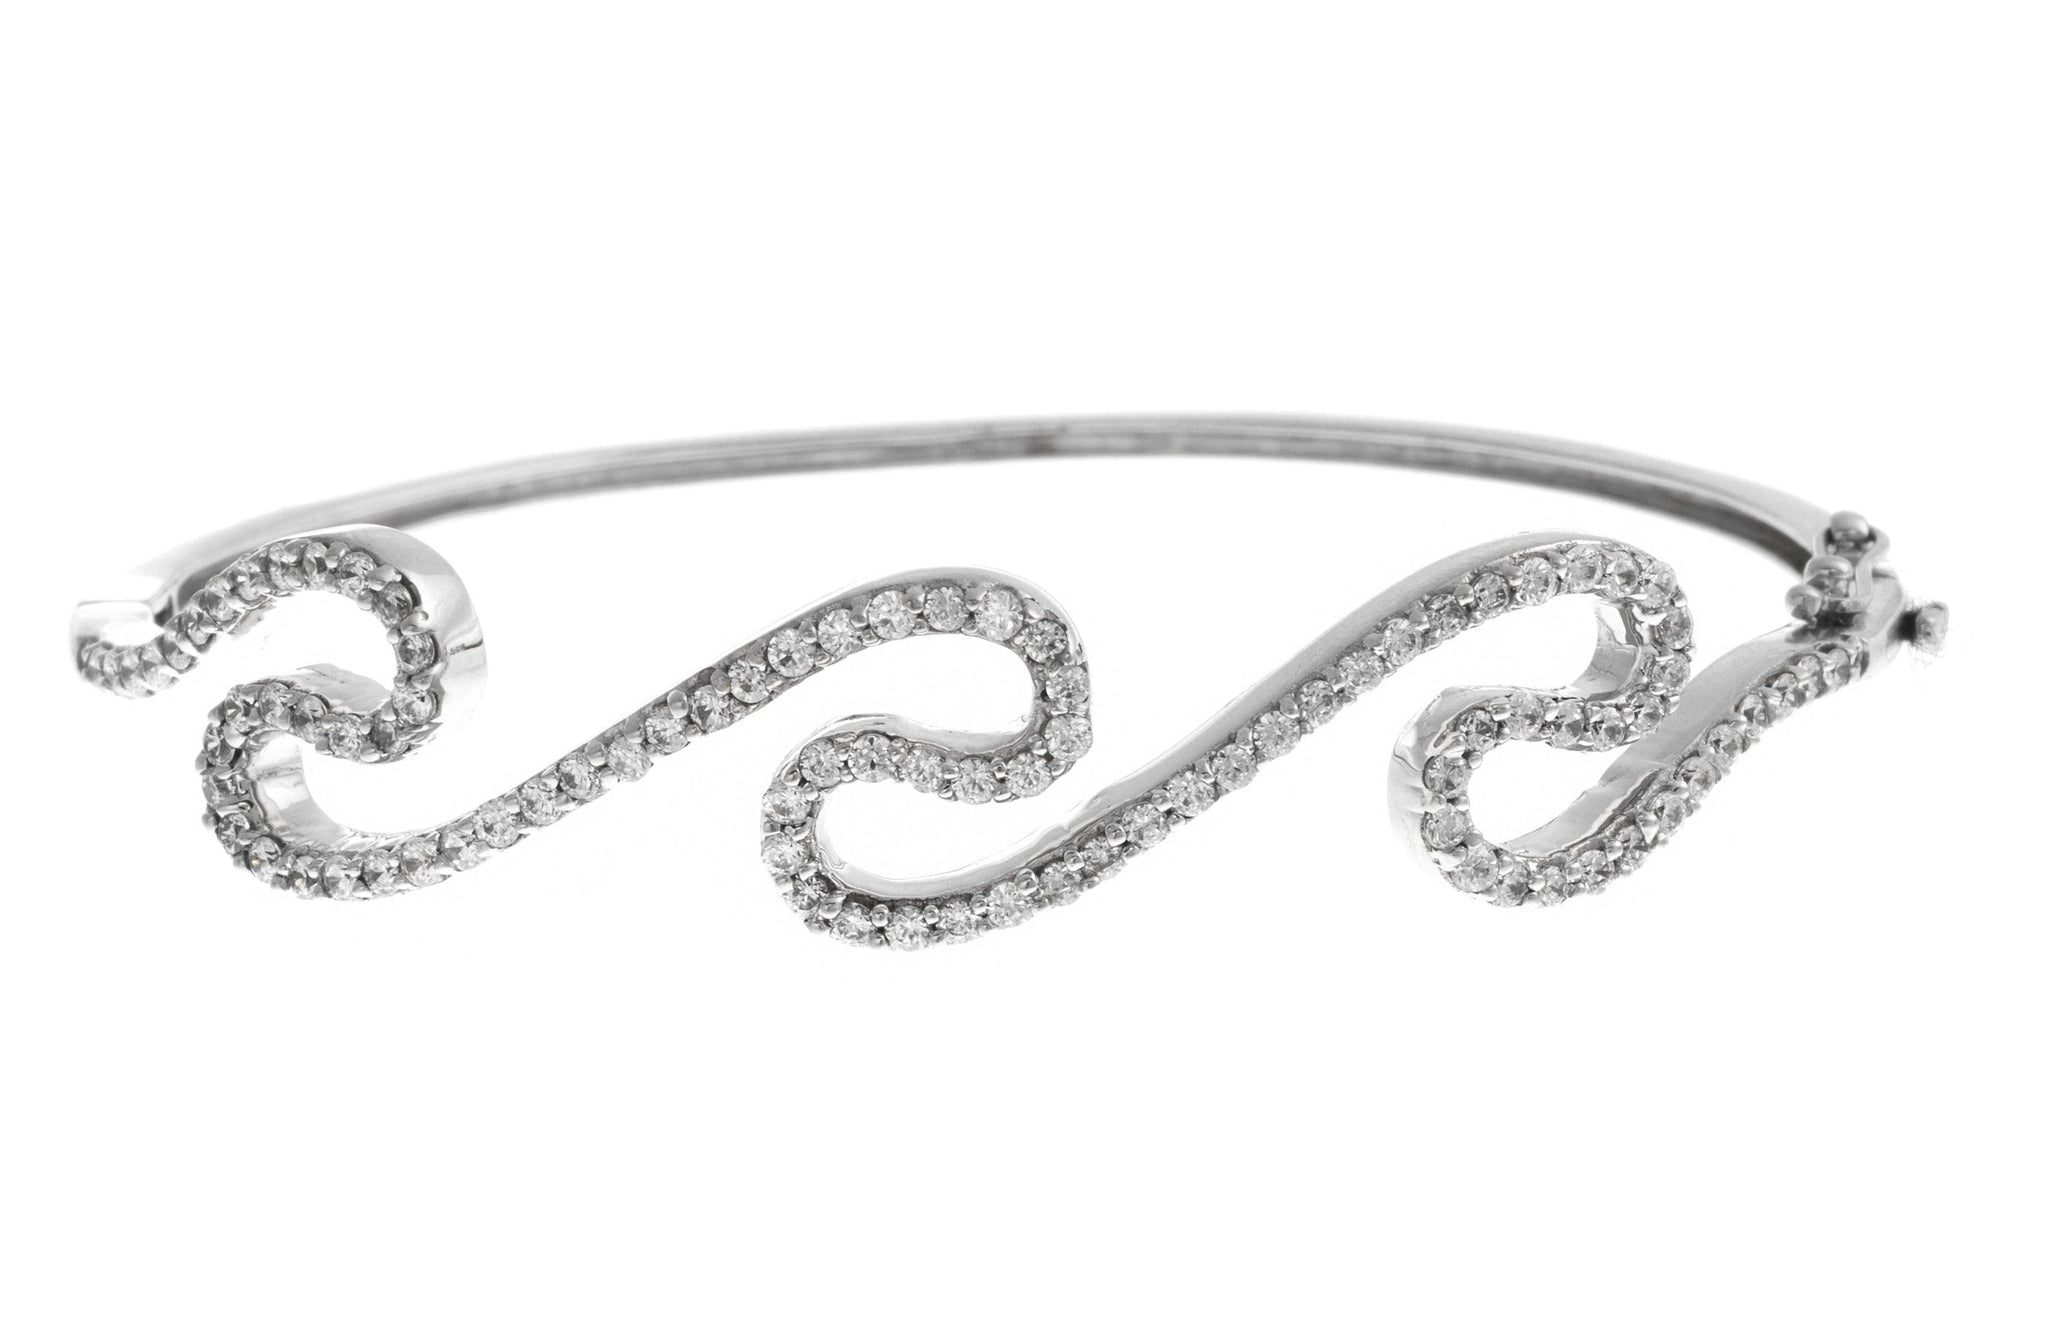 18ct White Gold Bangle with Cubic Zirconia Stones (16.7g) (B-1457)